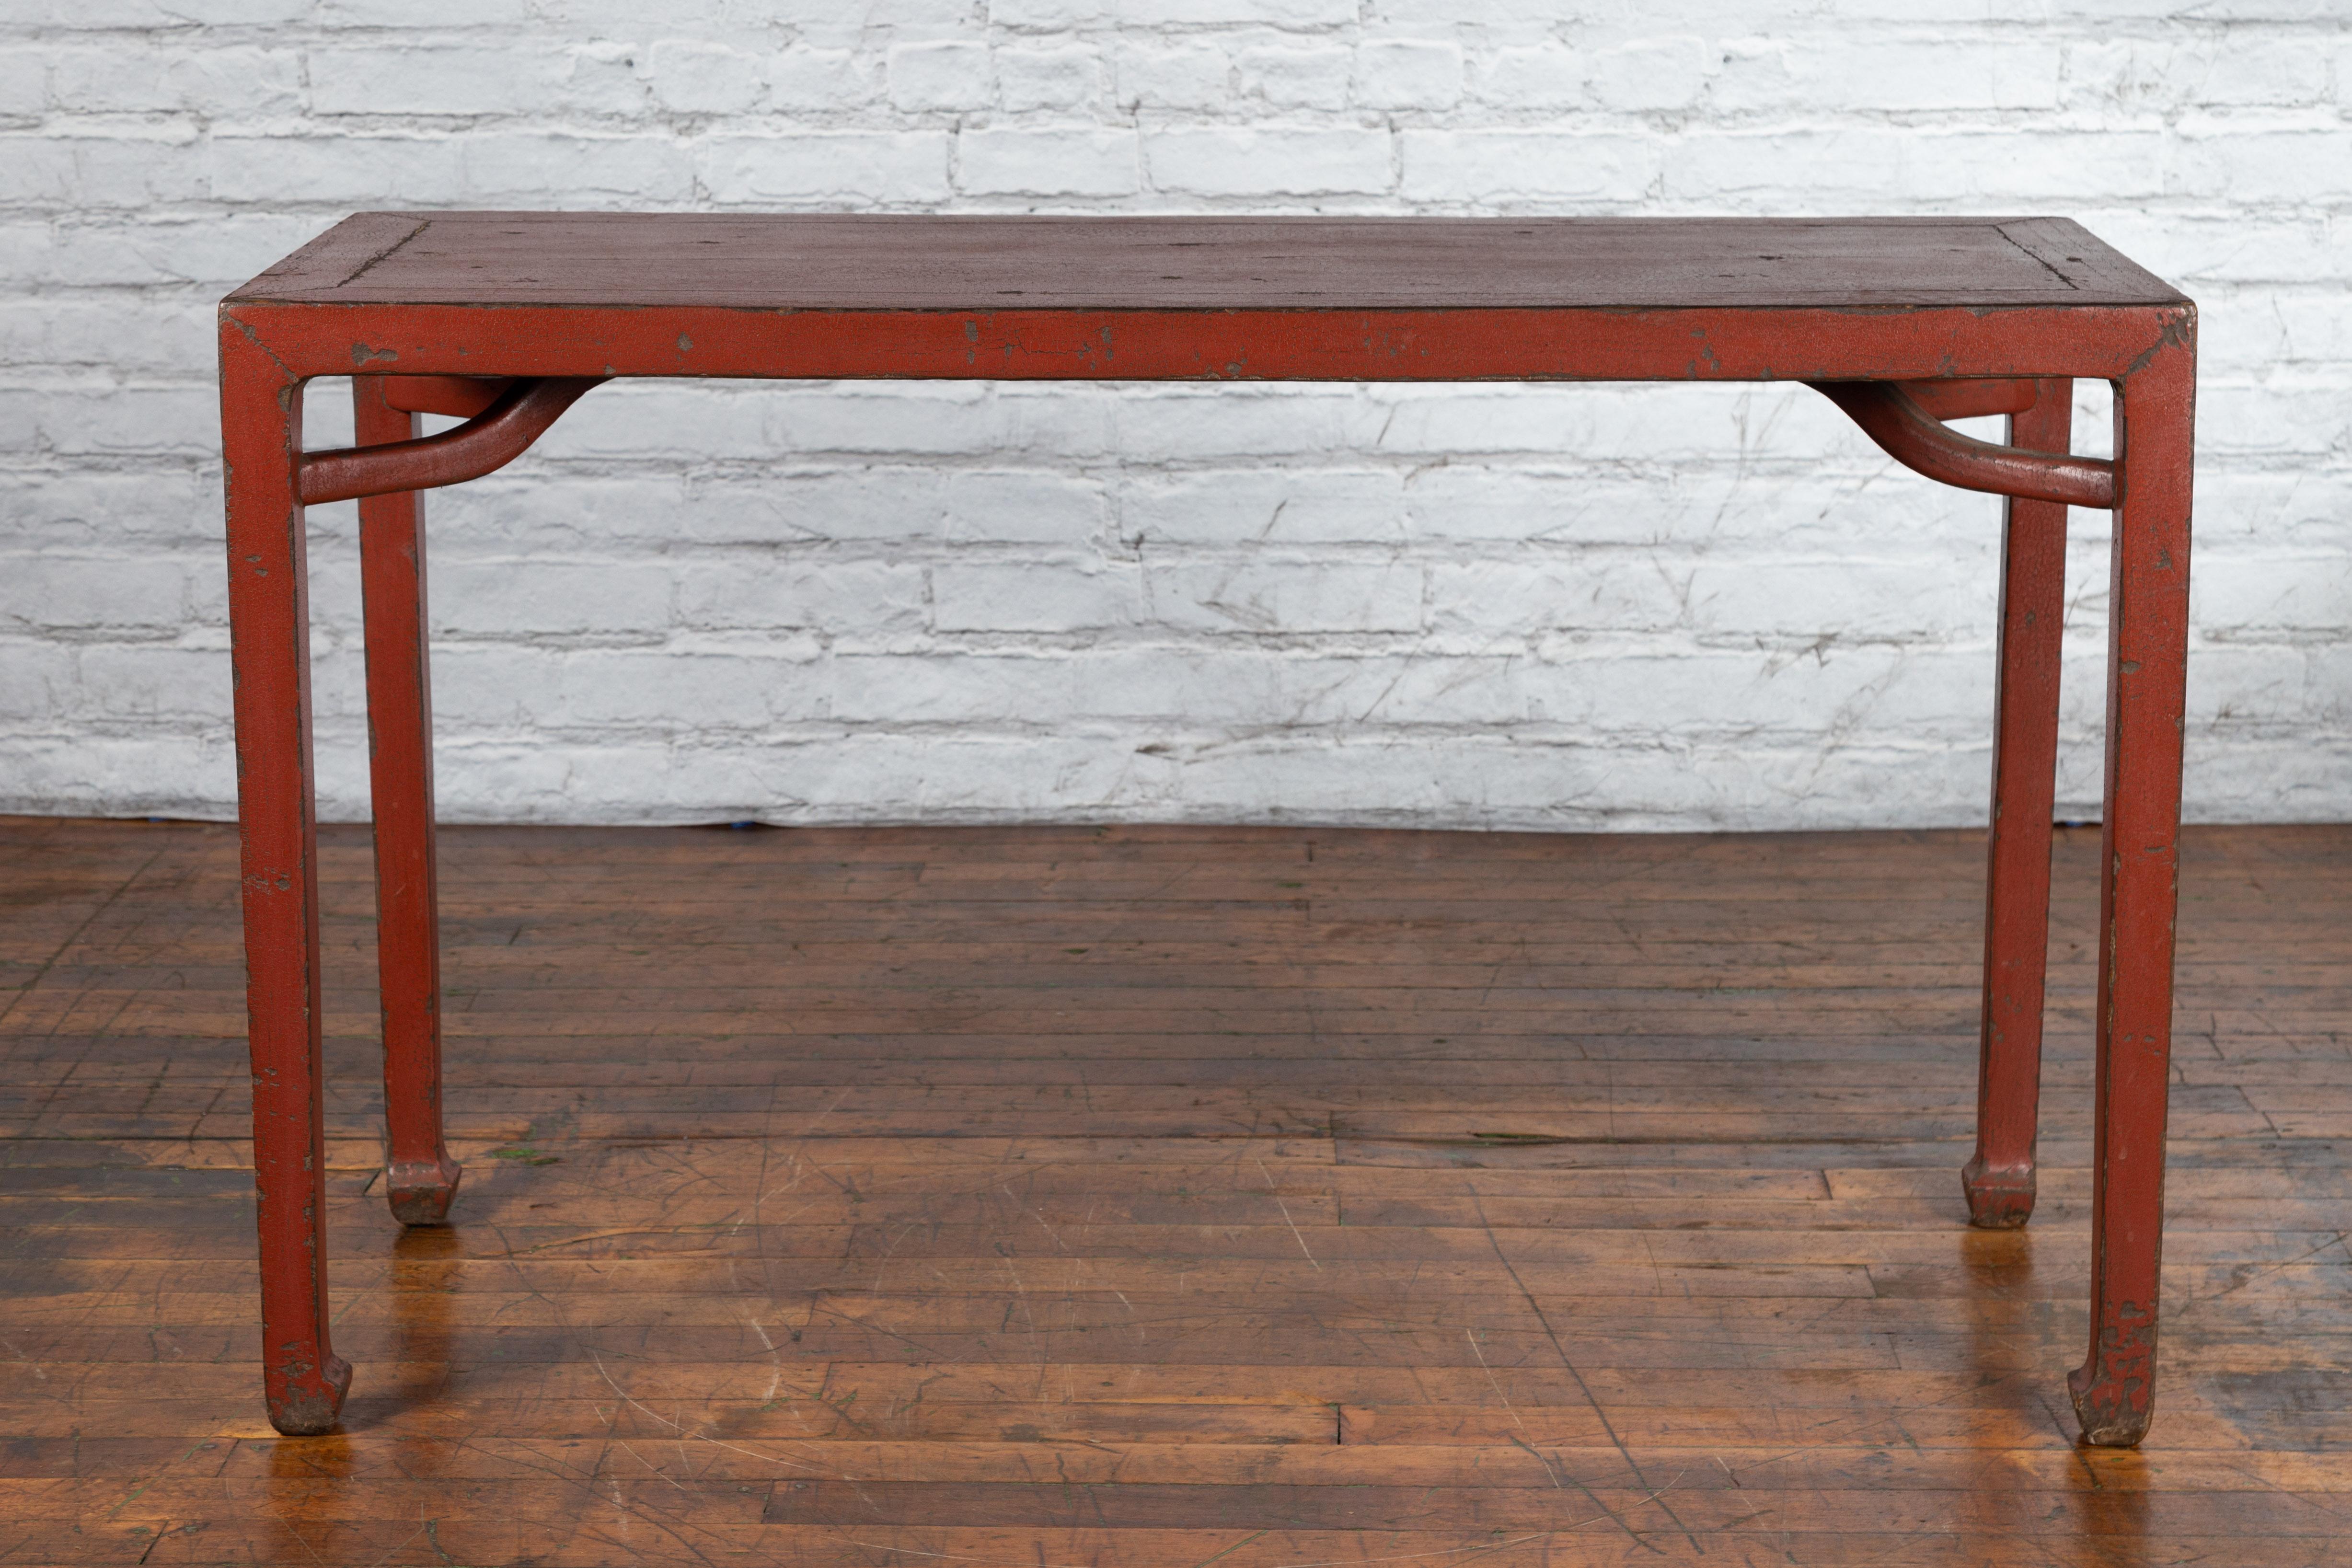 An antique Chinese Qing Dynasty period red lacquered console table from the 19th century with original patina. Created in China during the Qing Dynasty, this console table features a rectangular top with central board, sitting above four straight